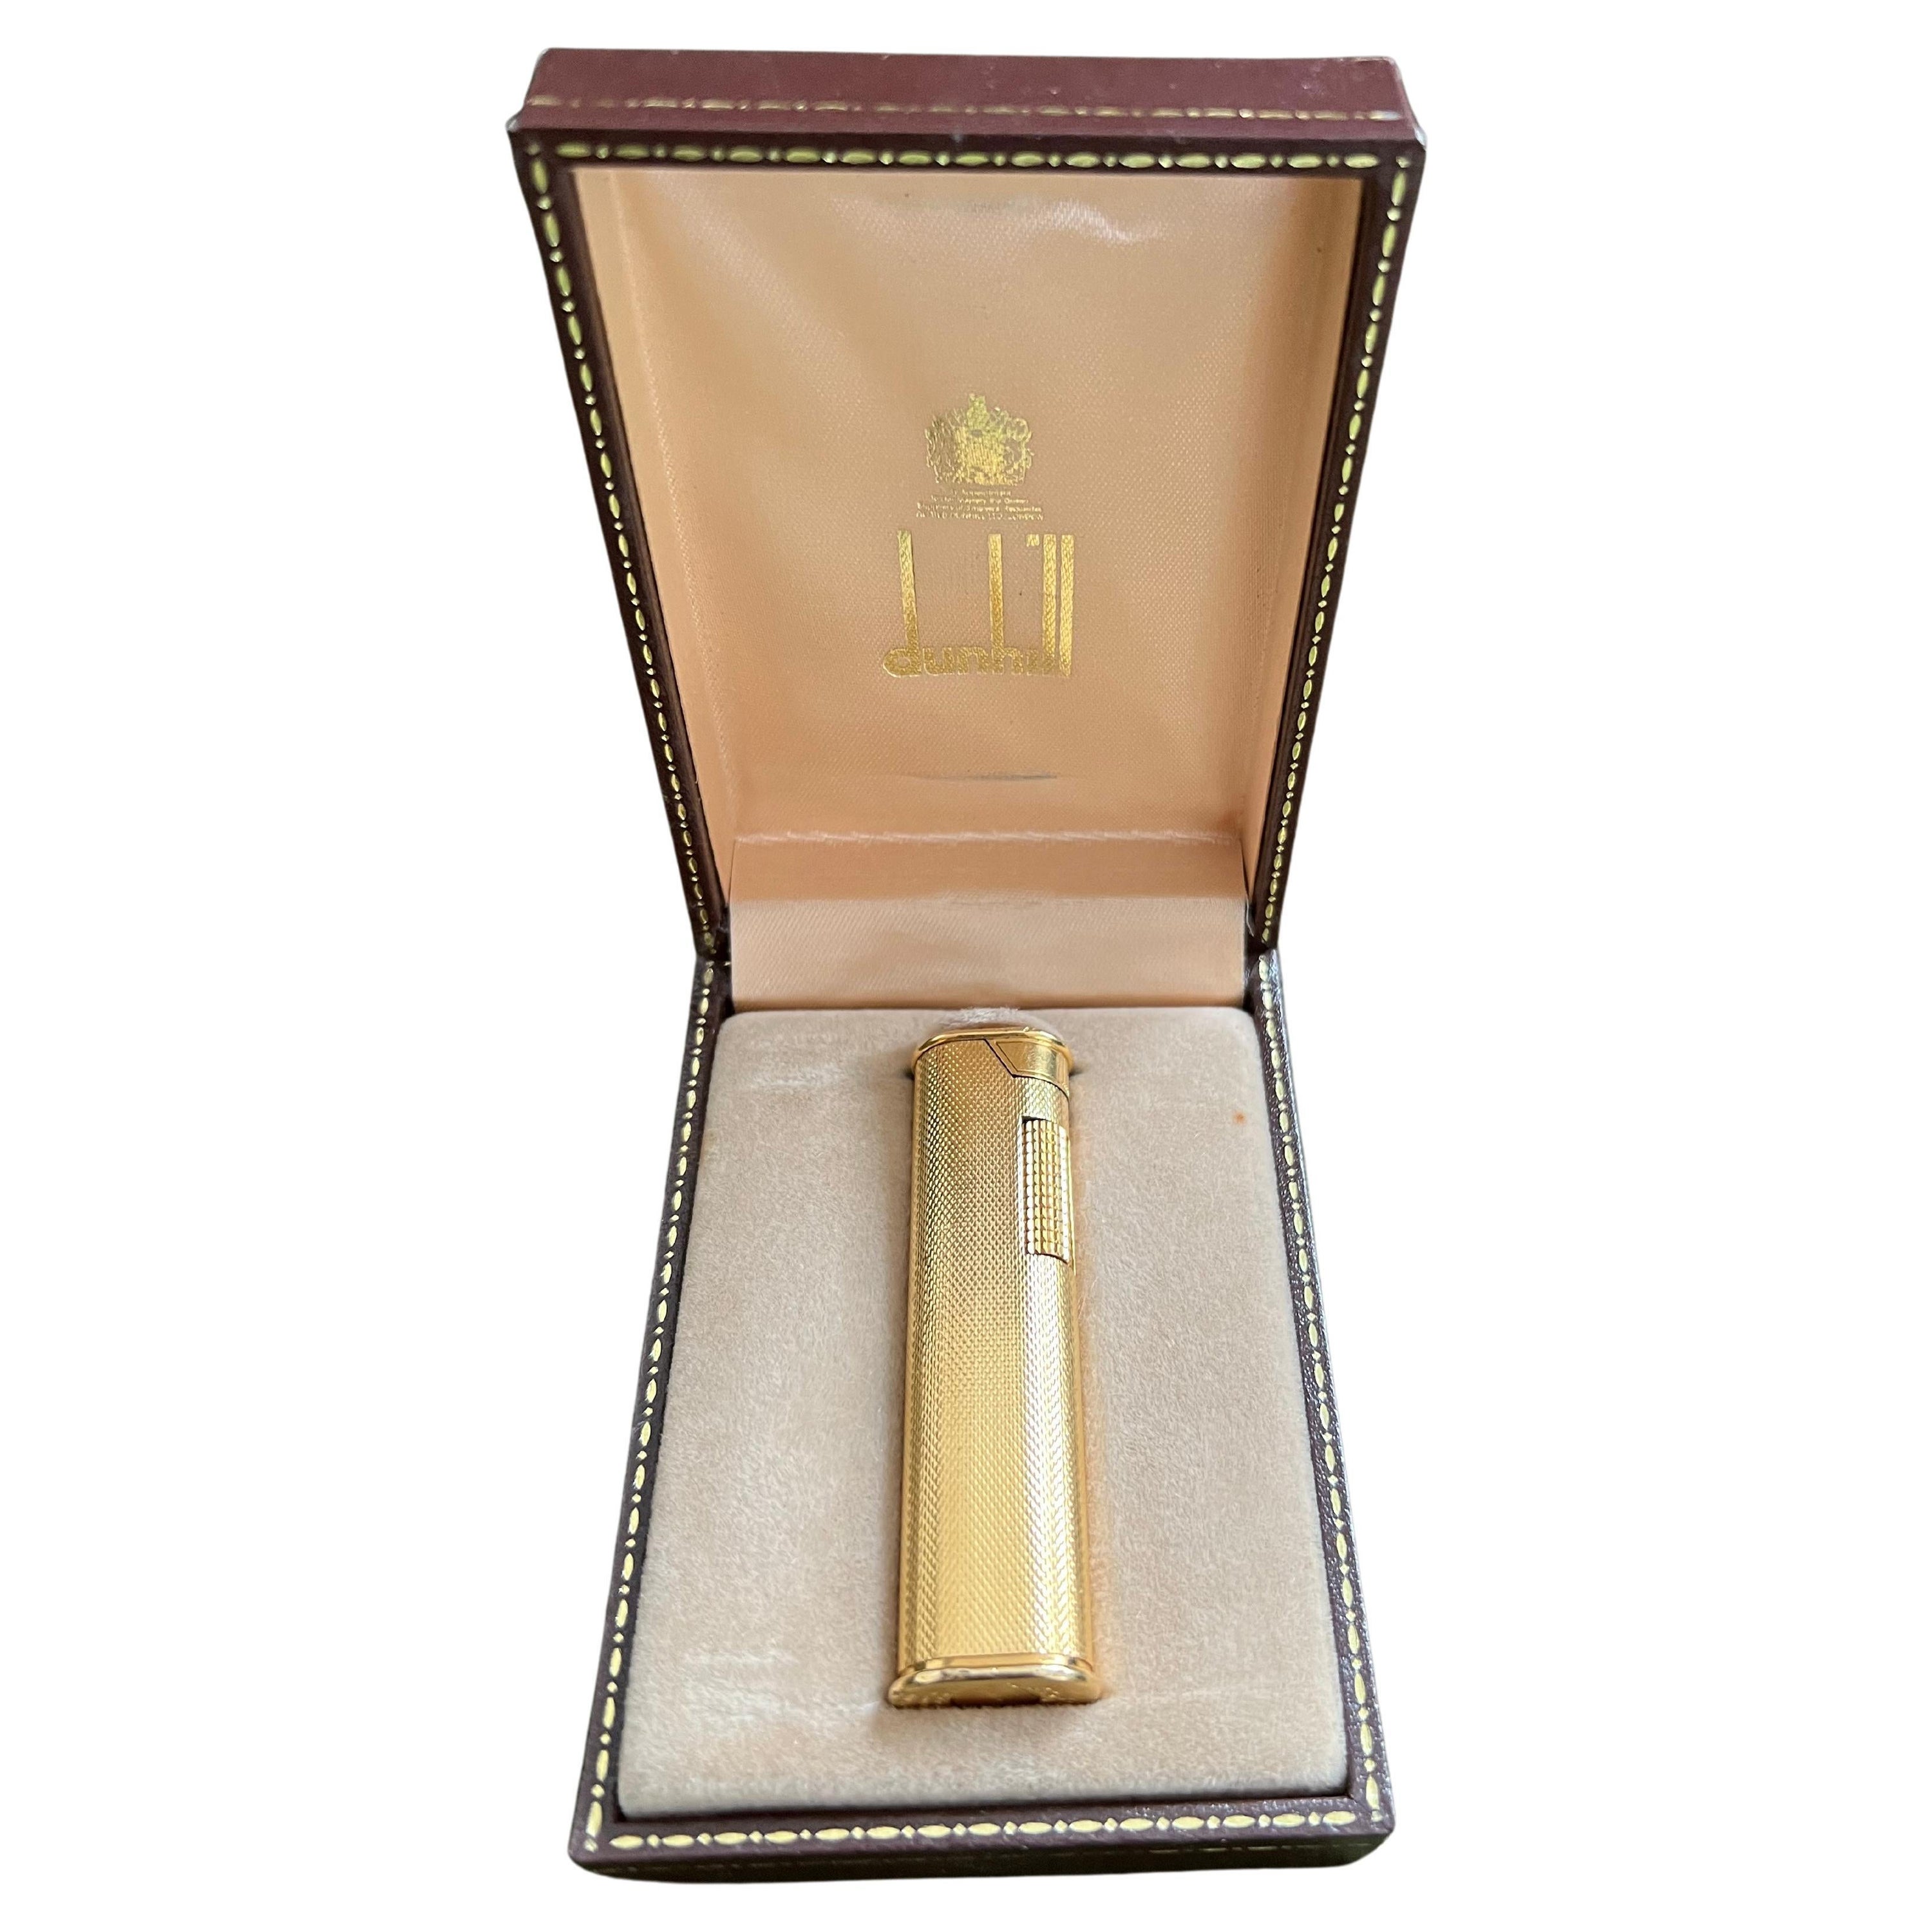 Are Dunhill lighters gold plated?